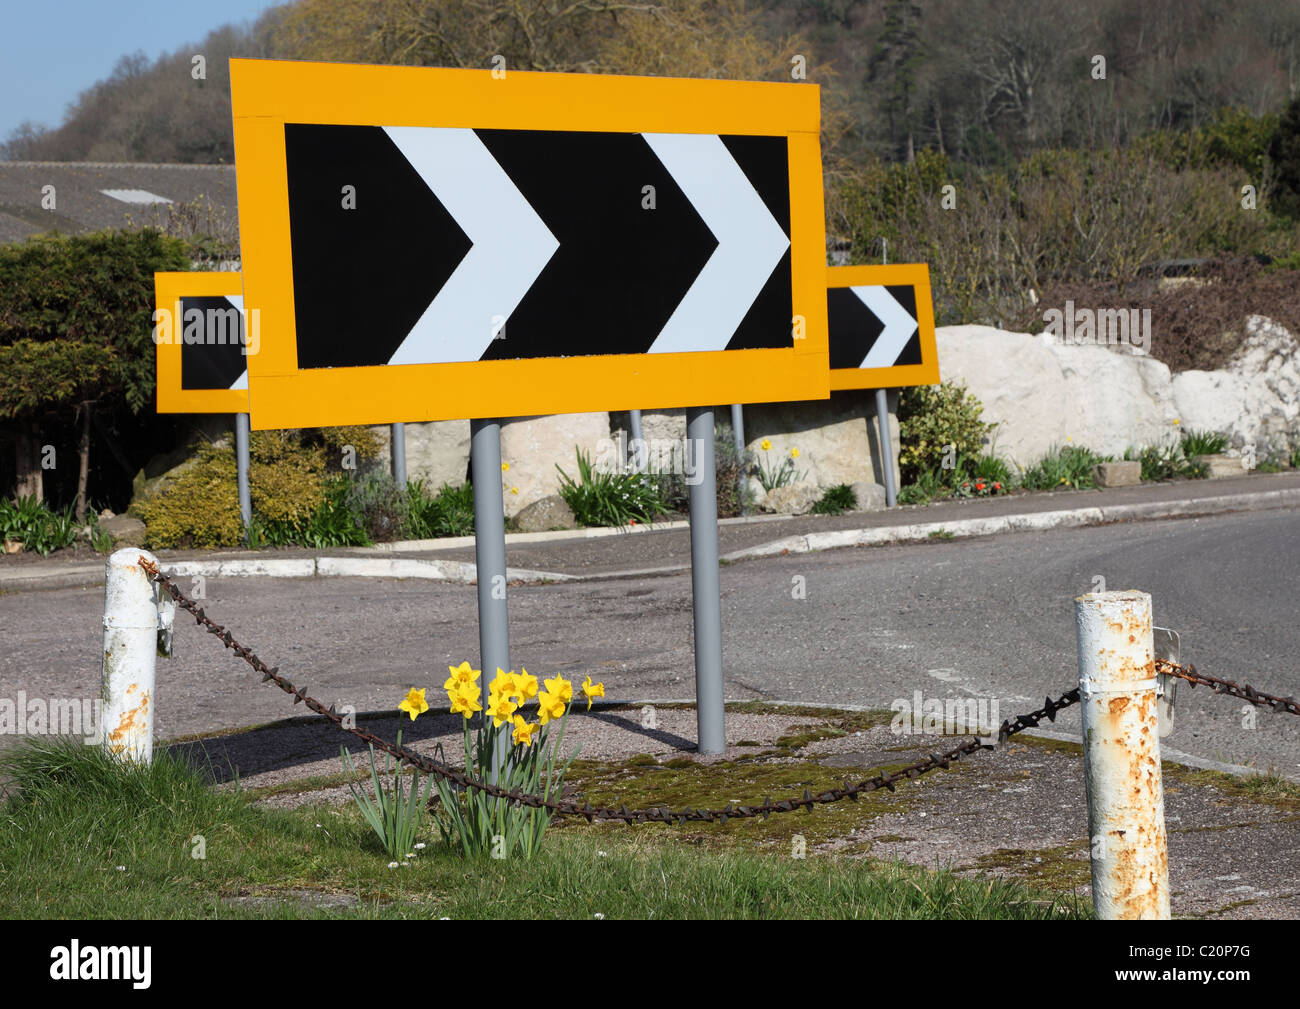 Keep right signs. Road bends to right. Stock Photo